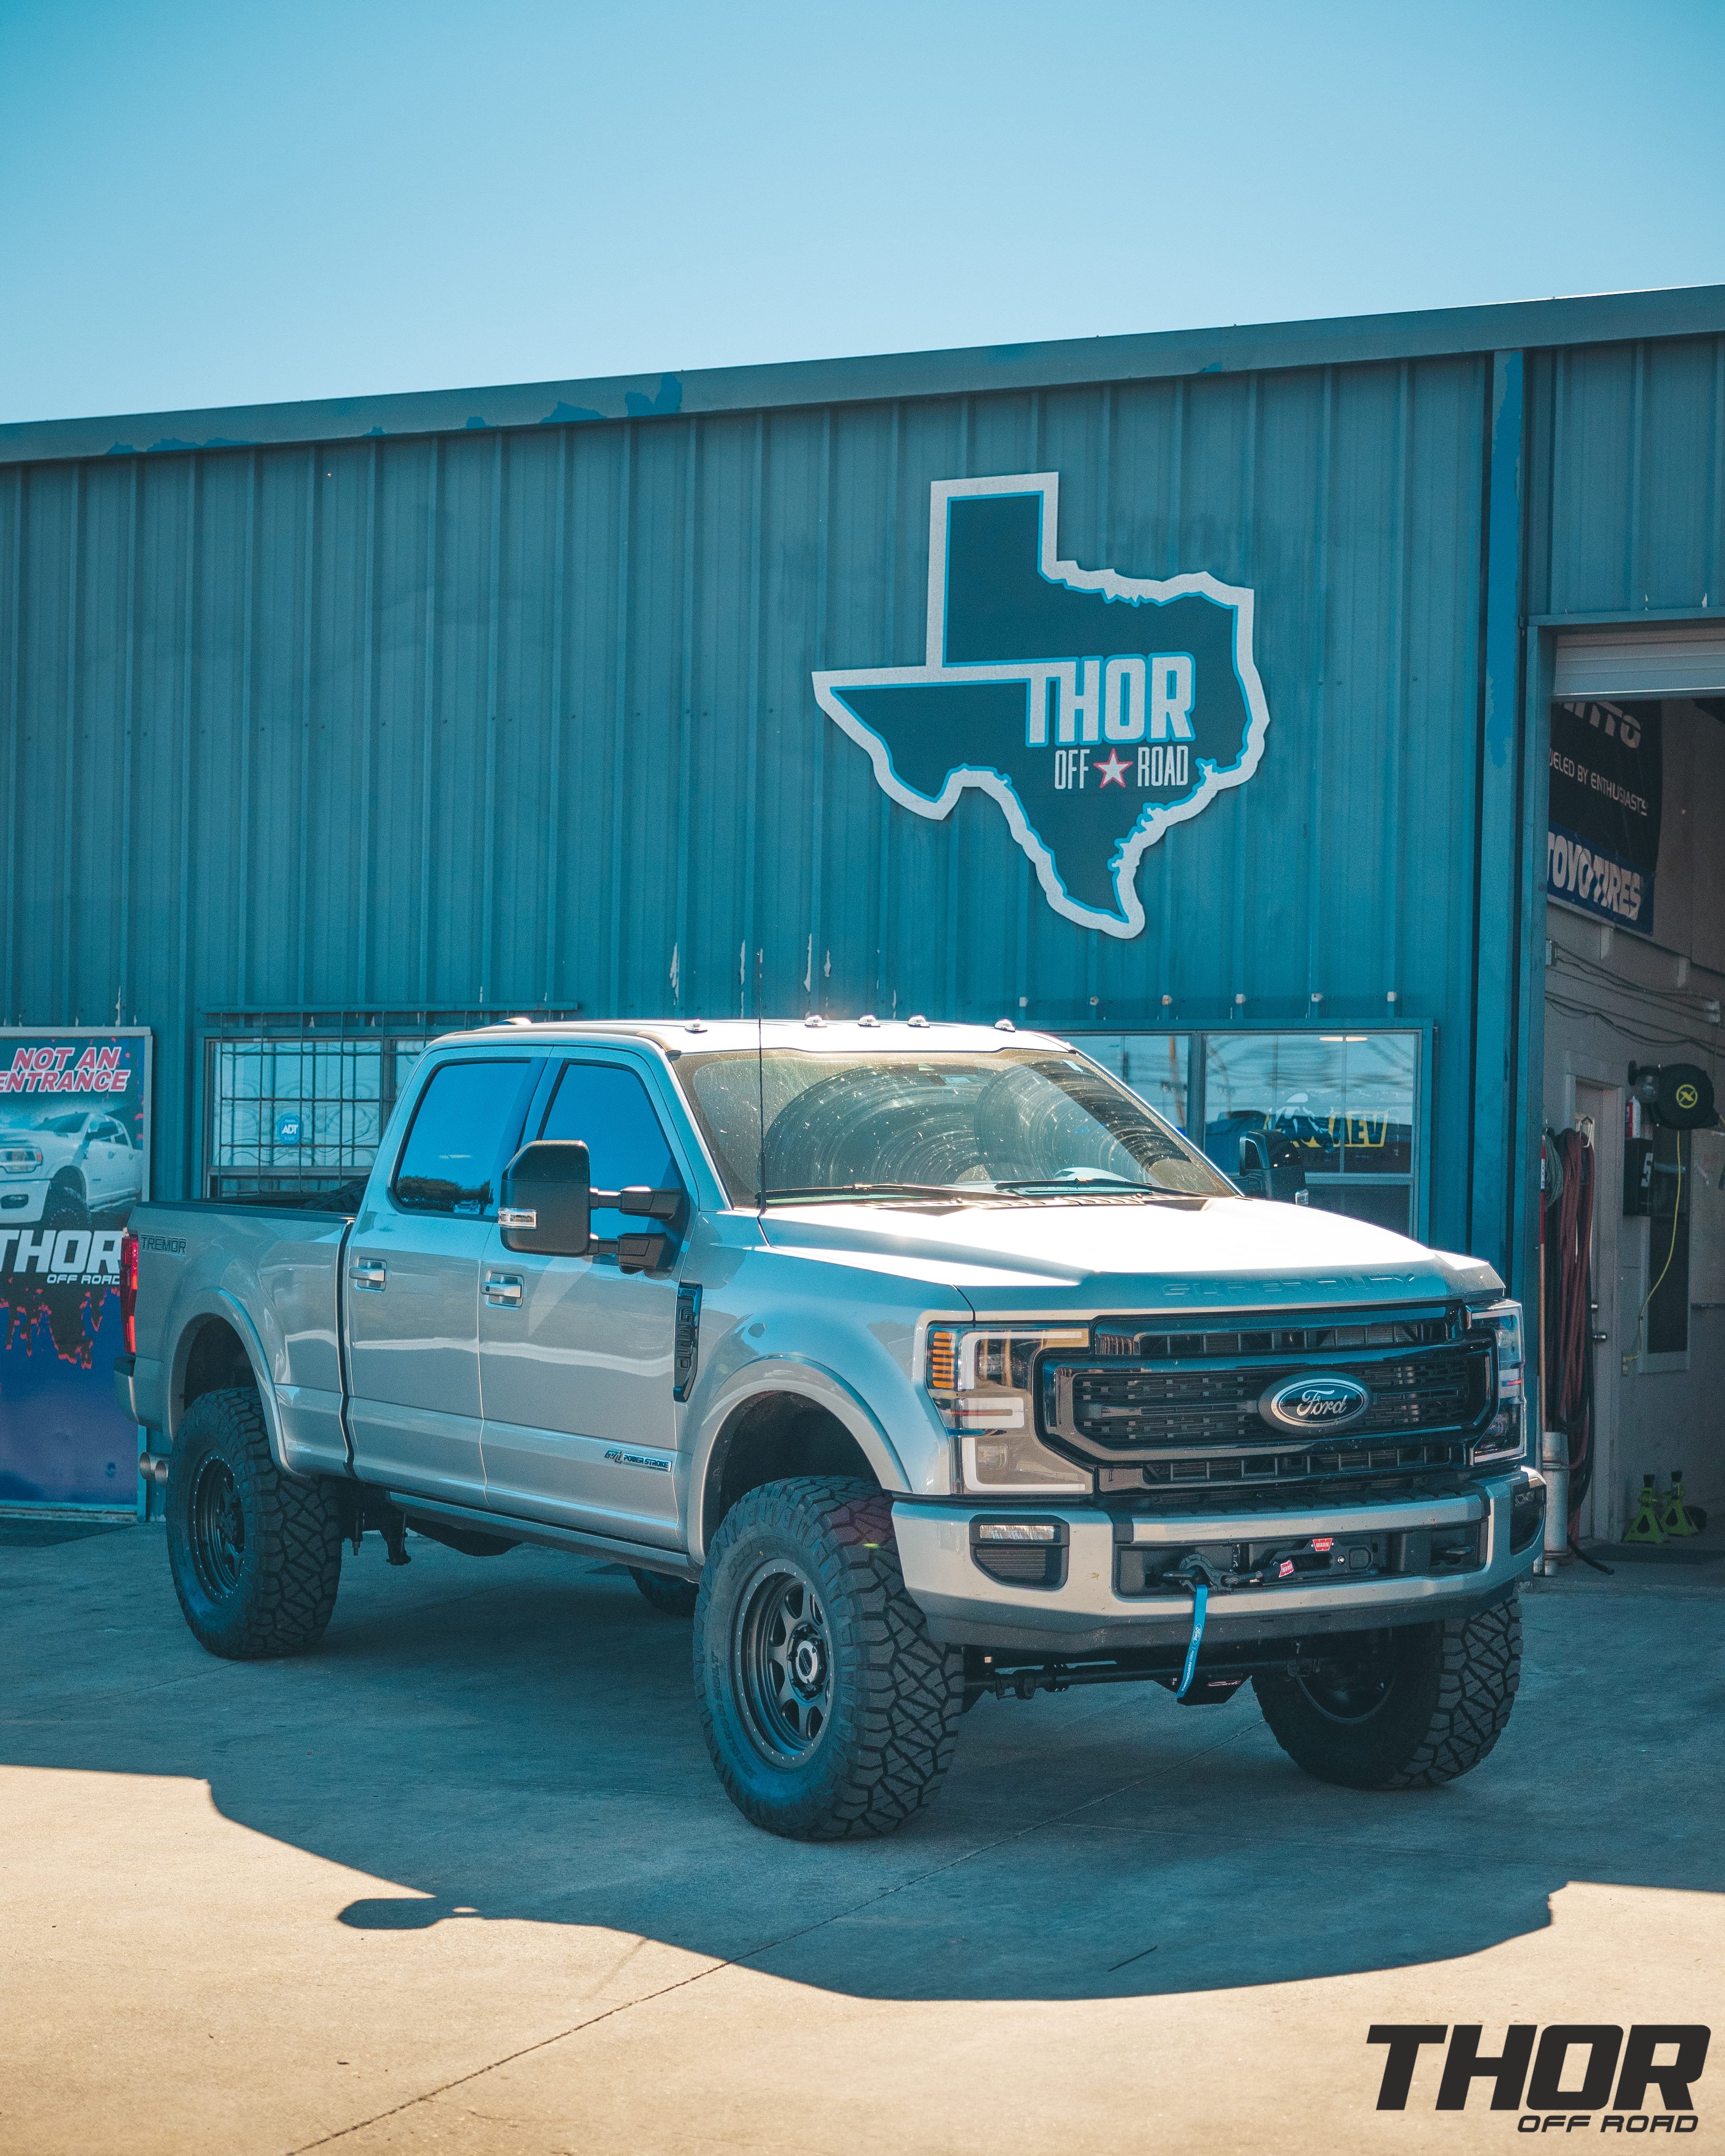 2022 Ford F-350 Super Duty Lariat in Silver with Carli 5.5" Backcountry Suspension Kit, Carli Full Rear Spring Replacement, Carli Long Travel Air Bag Kit, Carli High Mount Steering Stabilizer, Carli Low Mount Steering Stabilizer, Carli Torsion Sway Bar, Carli Radius Arms